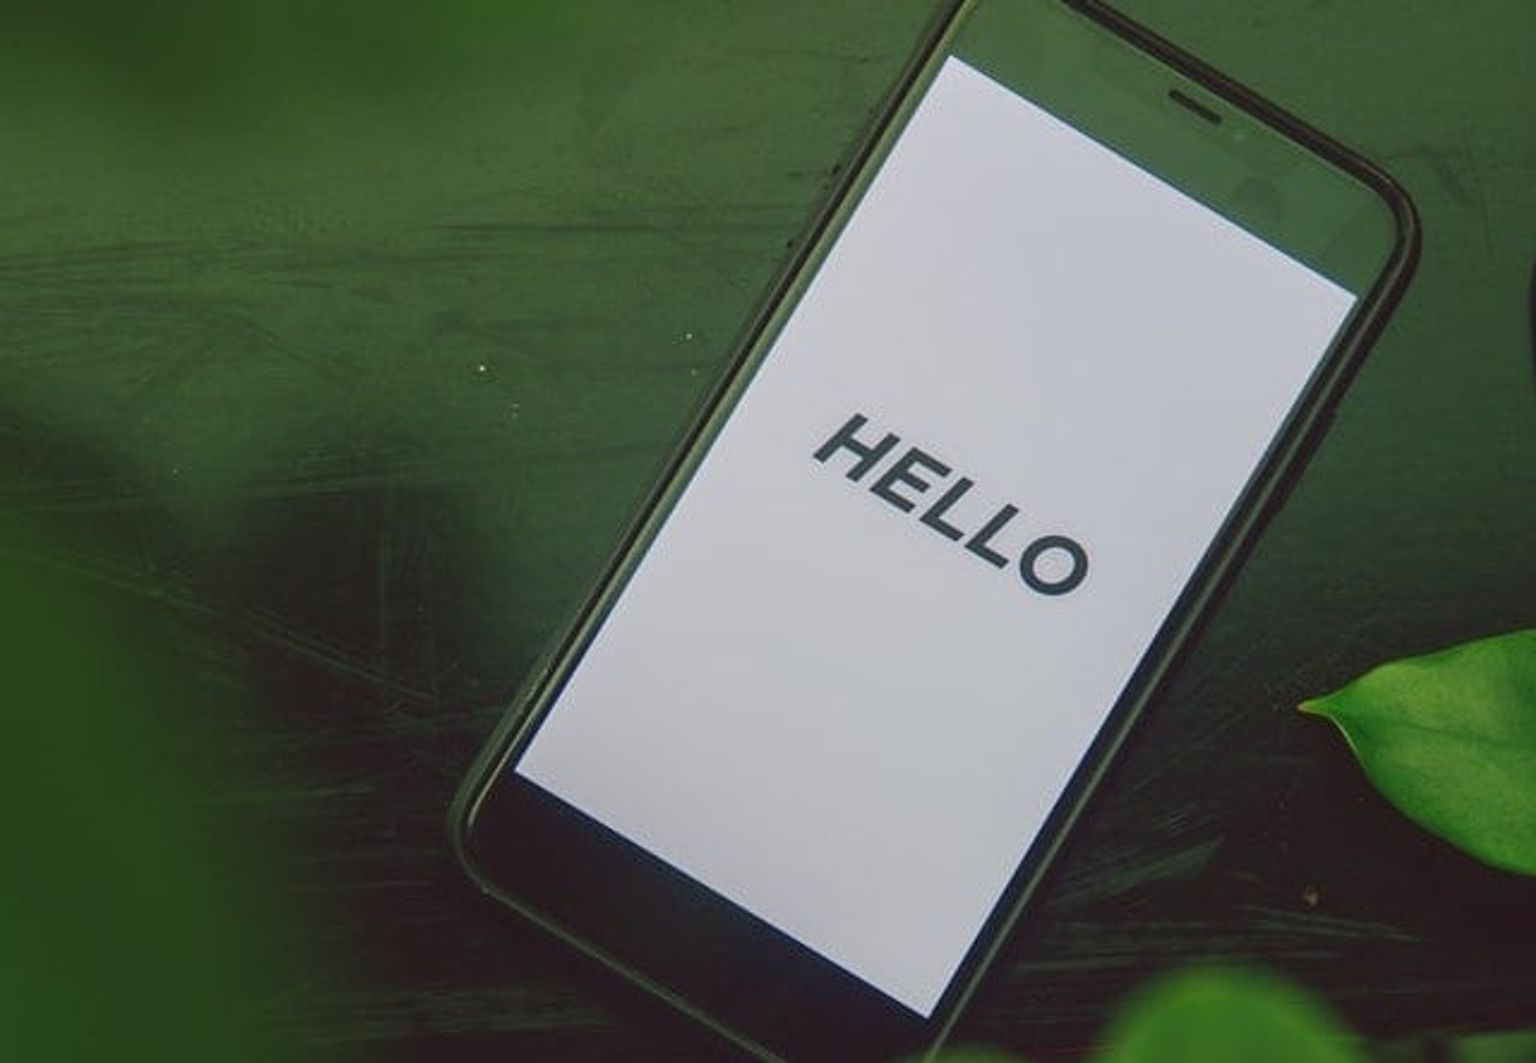 "Hello" text on a smartphone screen